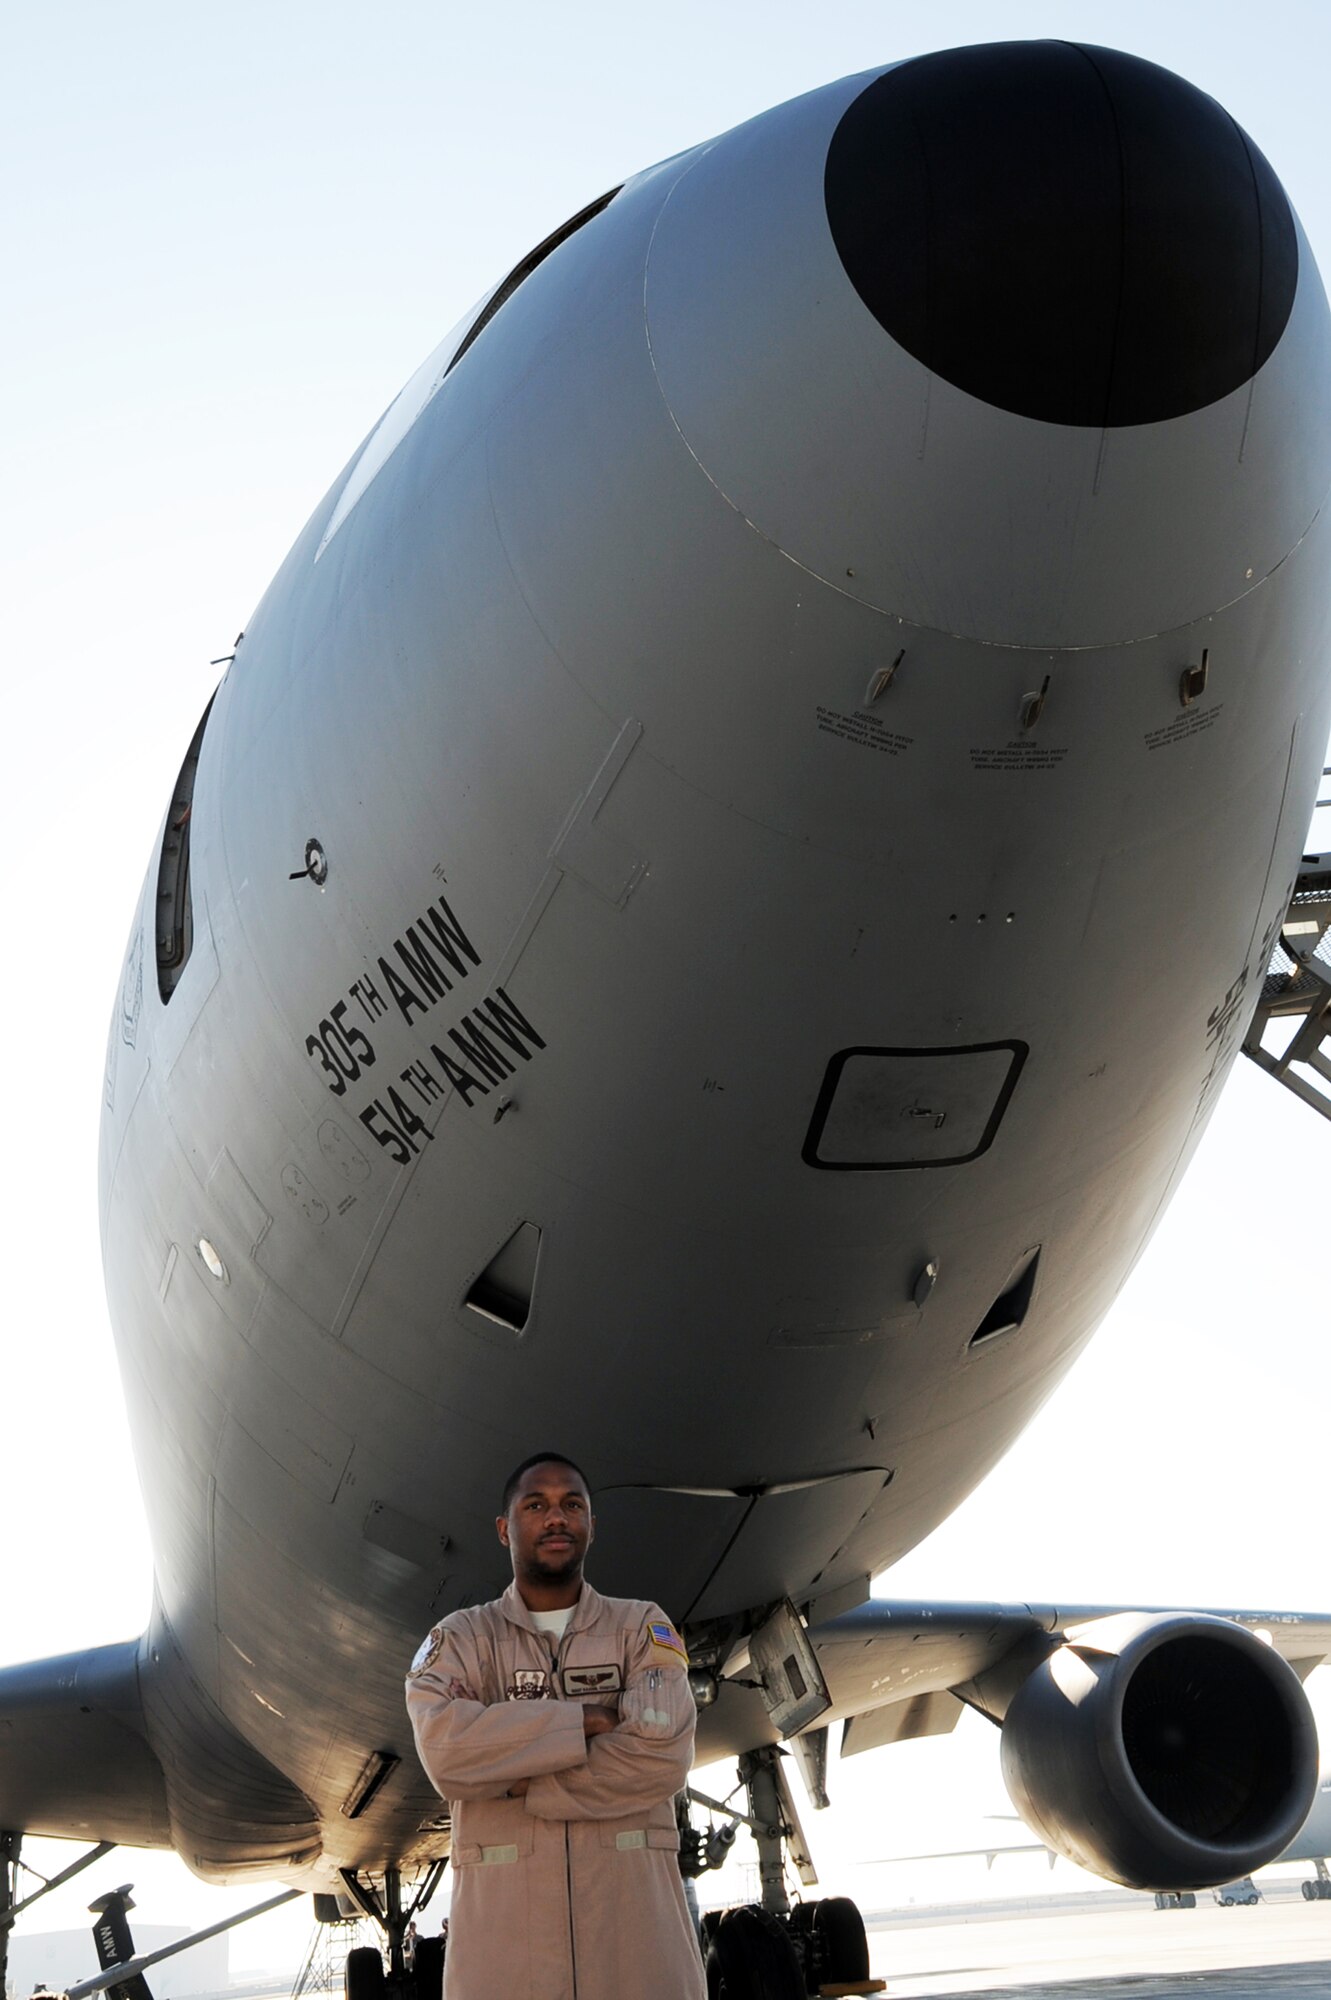 Staff Sgt. Kaamil Coston, KC-10 Extender flight engineer with the 908th Expeditionary Air Refueling Squadron at a non-disclosed base in Southwest Asia, stands in front of a KC-10 Jan. 8, 2009.  Sergeant Coston, deployed from the 2nd Air Refueling Squadron at McGuire Air Force Base, N.J., ensures the KC-10 is ready to fly when a mission is prepared -- essentially the "systems expert" for the airframe.  The KC-10 is an Air Mobility Command advanced tanker and cargo aircraft designed to provide increased global mobility for U.S. armed forces. Although the KC-l0's primary mission is aerial refueling, it can combine the tasks of a tanker and cargo aircraft by refueling fighters and simultaneously carry the fighter support personnel and equipment on overseas deployments. Sergeant Coston's hometown is Staten Island, N.Y.  (U.S. Air Force Photo/Tech. Sgt. Scott T. Sturkol/Released) 